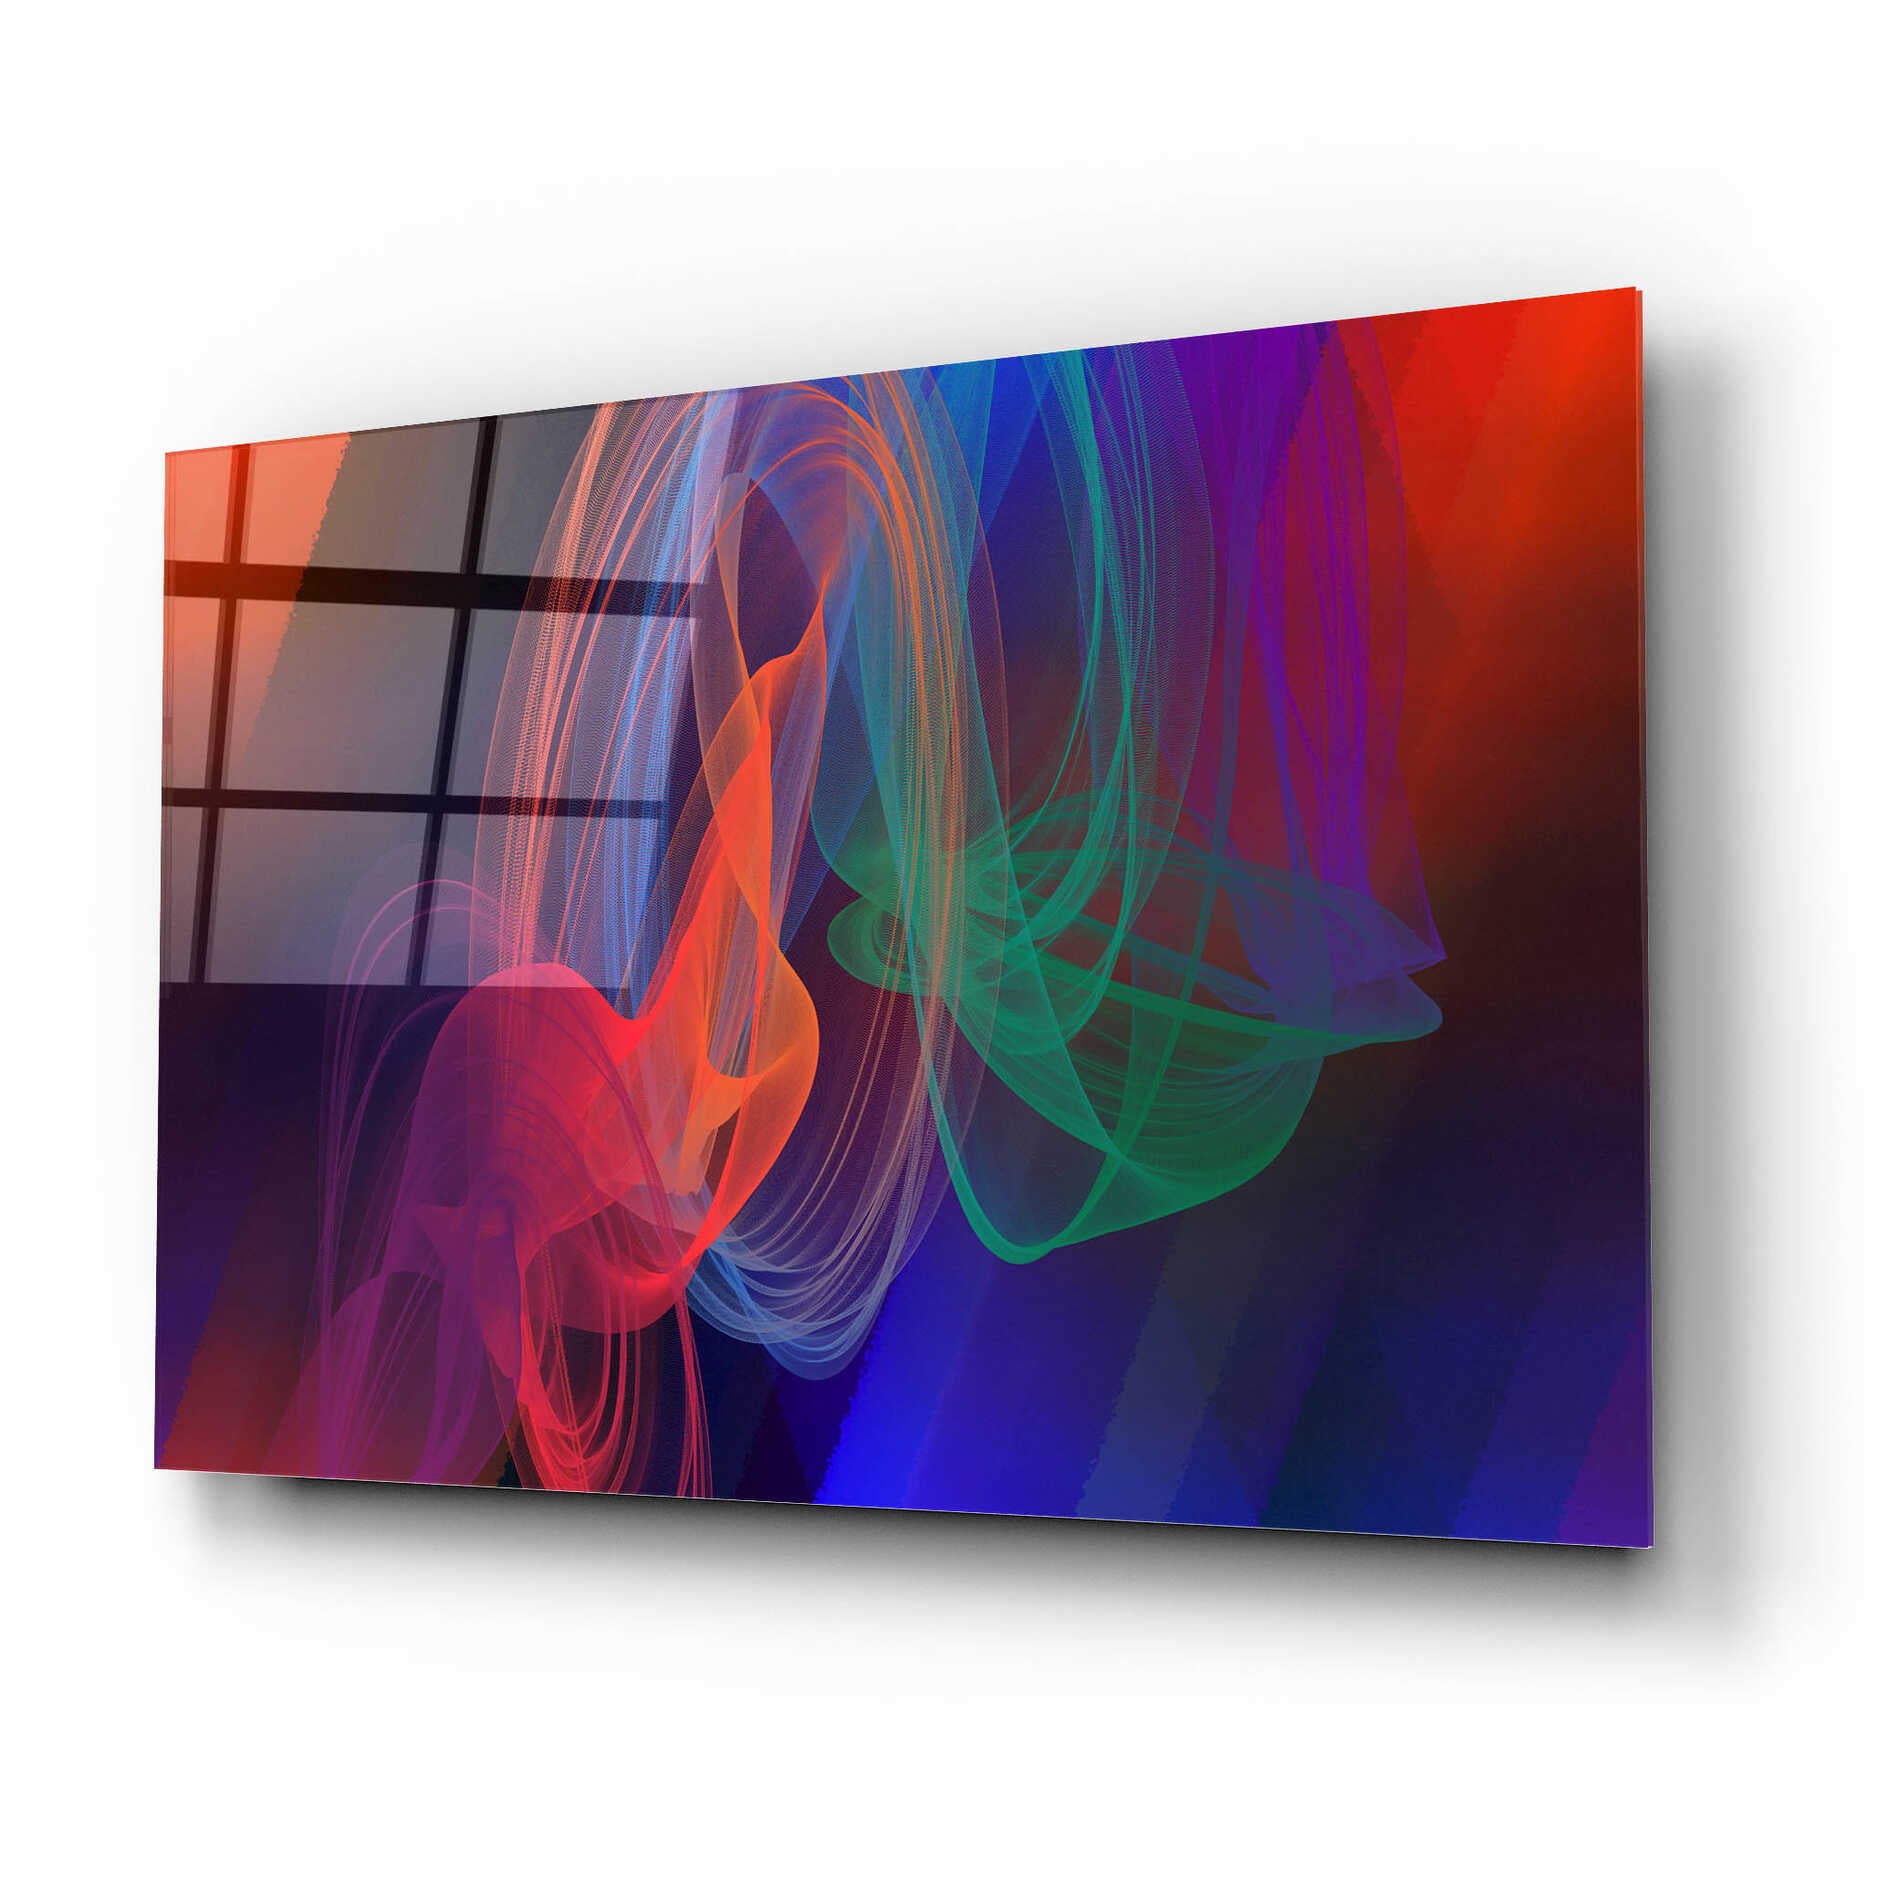 Epic Art 'Inverted Color In The Lines 11' by Irena Orlov Acrylic Glass Wall Art,24x16